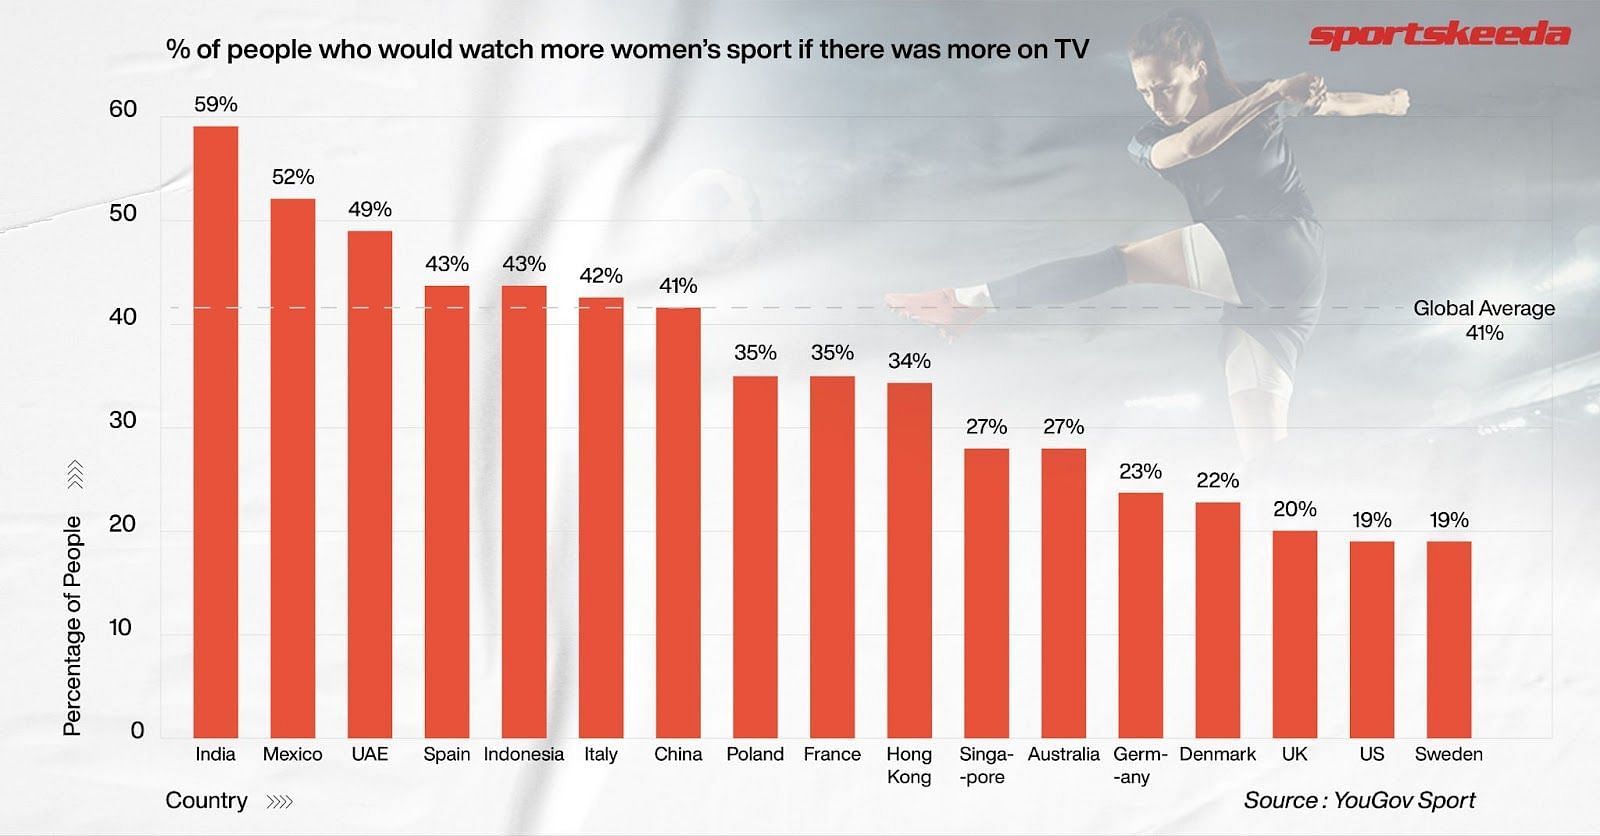 59% of Indian sports fans would watch more women&rsquo;s sport if available on TV (Image by Sportskeeda) (Source: YouGov Sport)